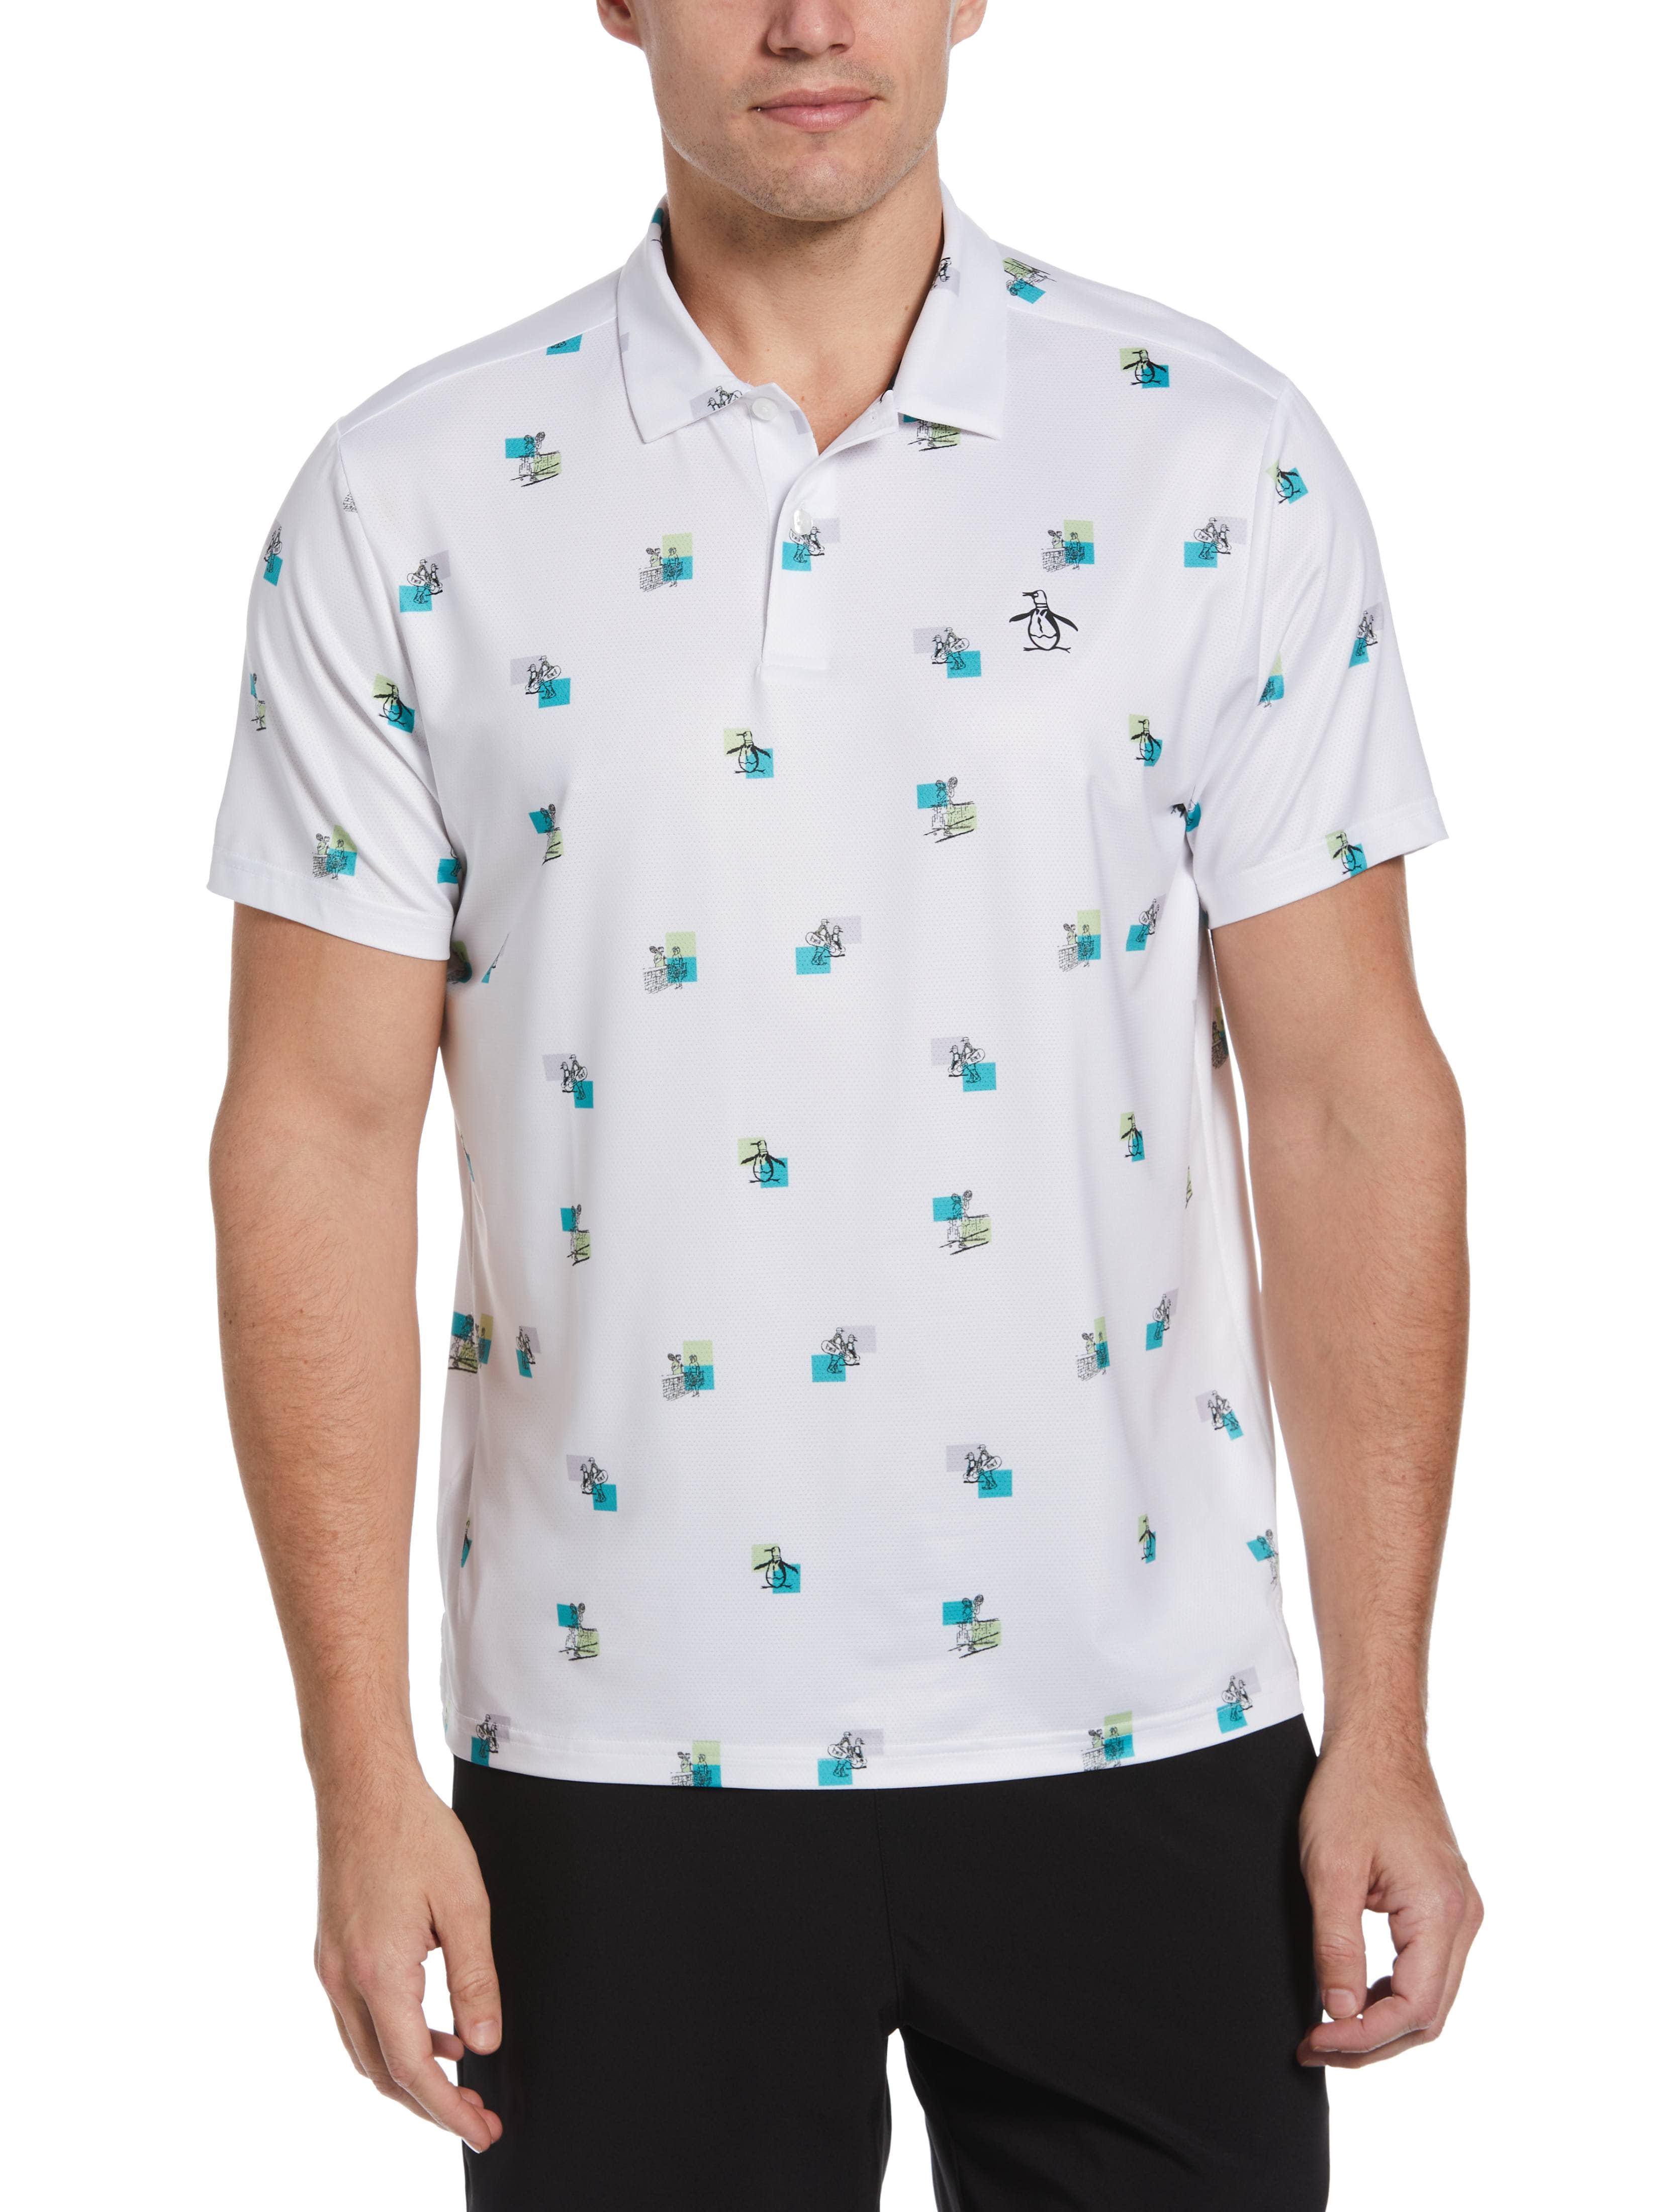 Original Penguin Mens Performance Heritage Print Tennis Polo Shirt, Size Small, White, Polyester/Recycled Polyester/Elastane | Golf Apparel Shop